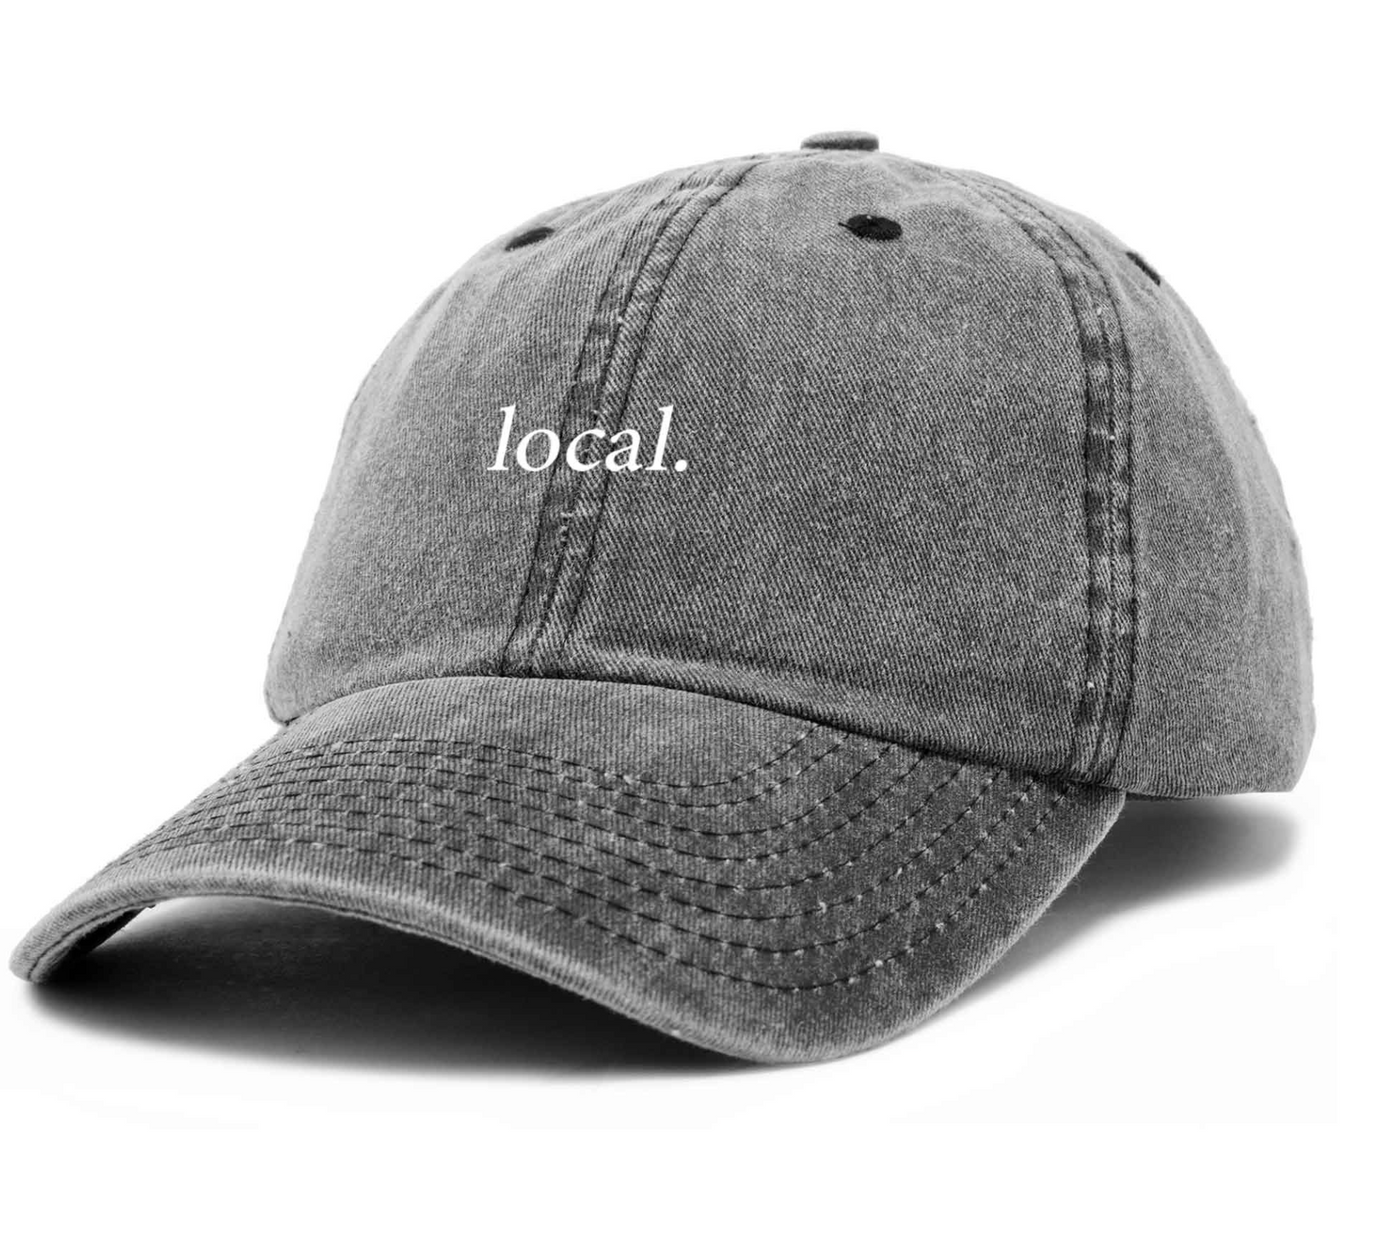 Local Expression Ball Cap Mens Womens Embroidered Hat